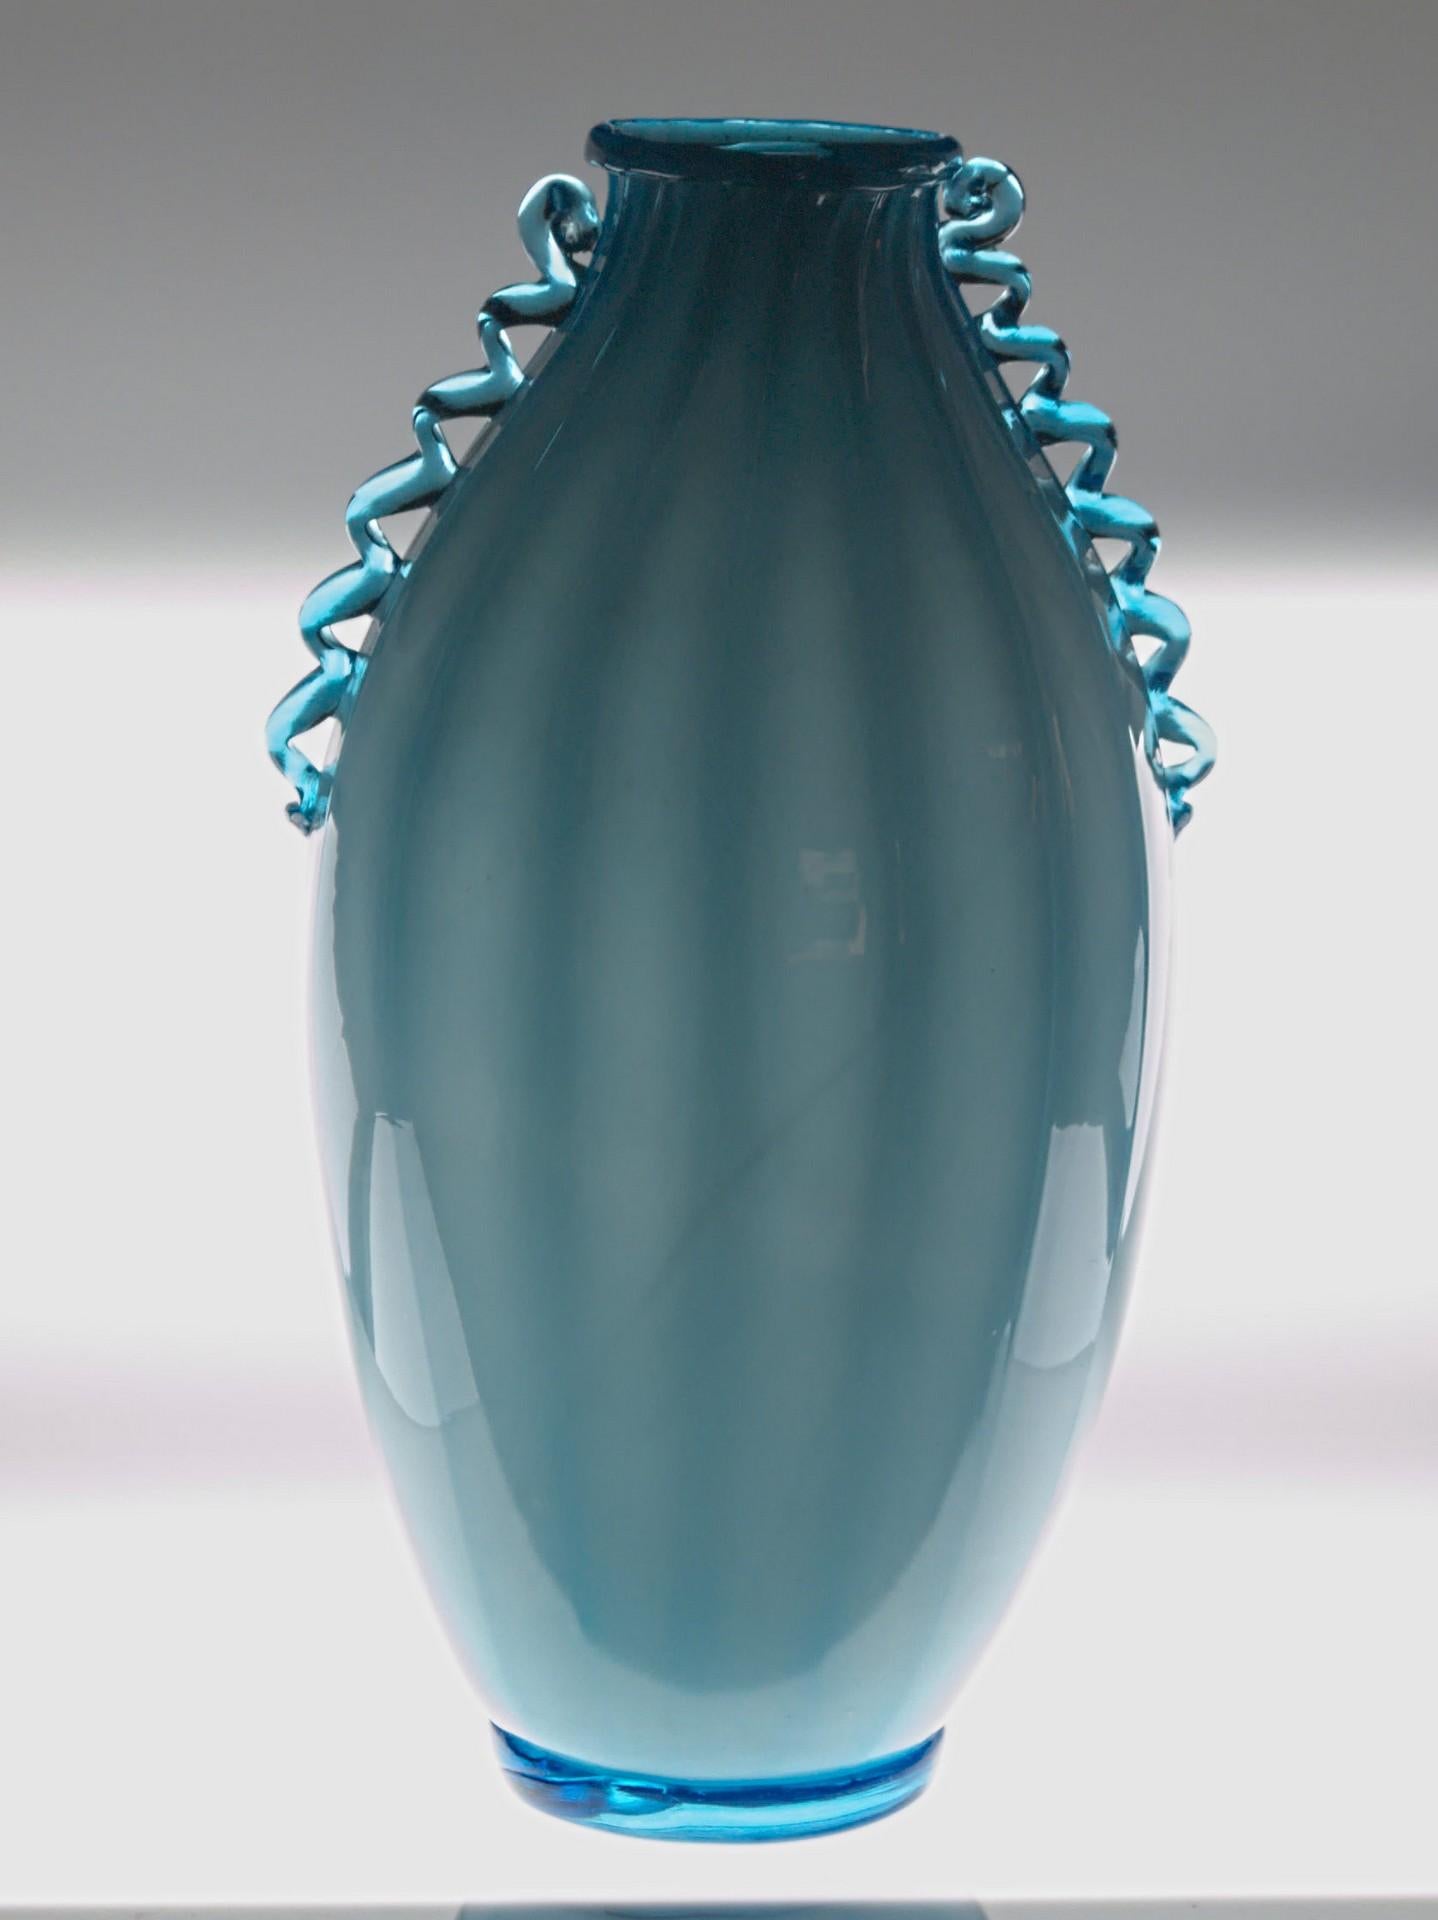 This vase shows many features that are on the Marinuzzi Zecchin vessel production. It's costolato sfumato with typical hansw handles and the curl at the upper end.

Has the costolatora in the same way of other vases and the typical morisa non